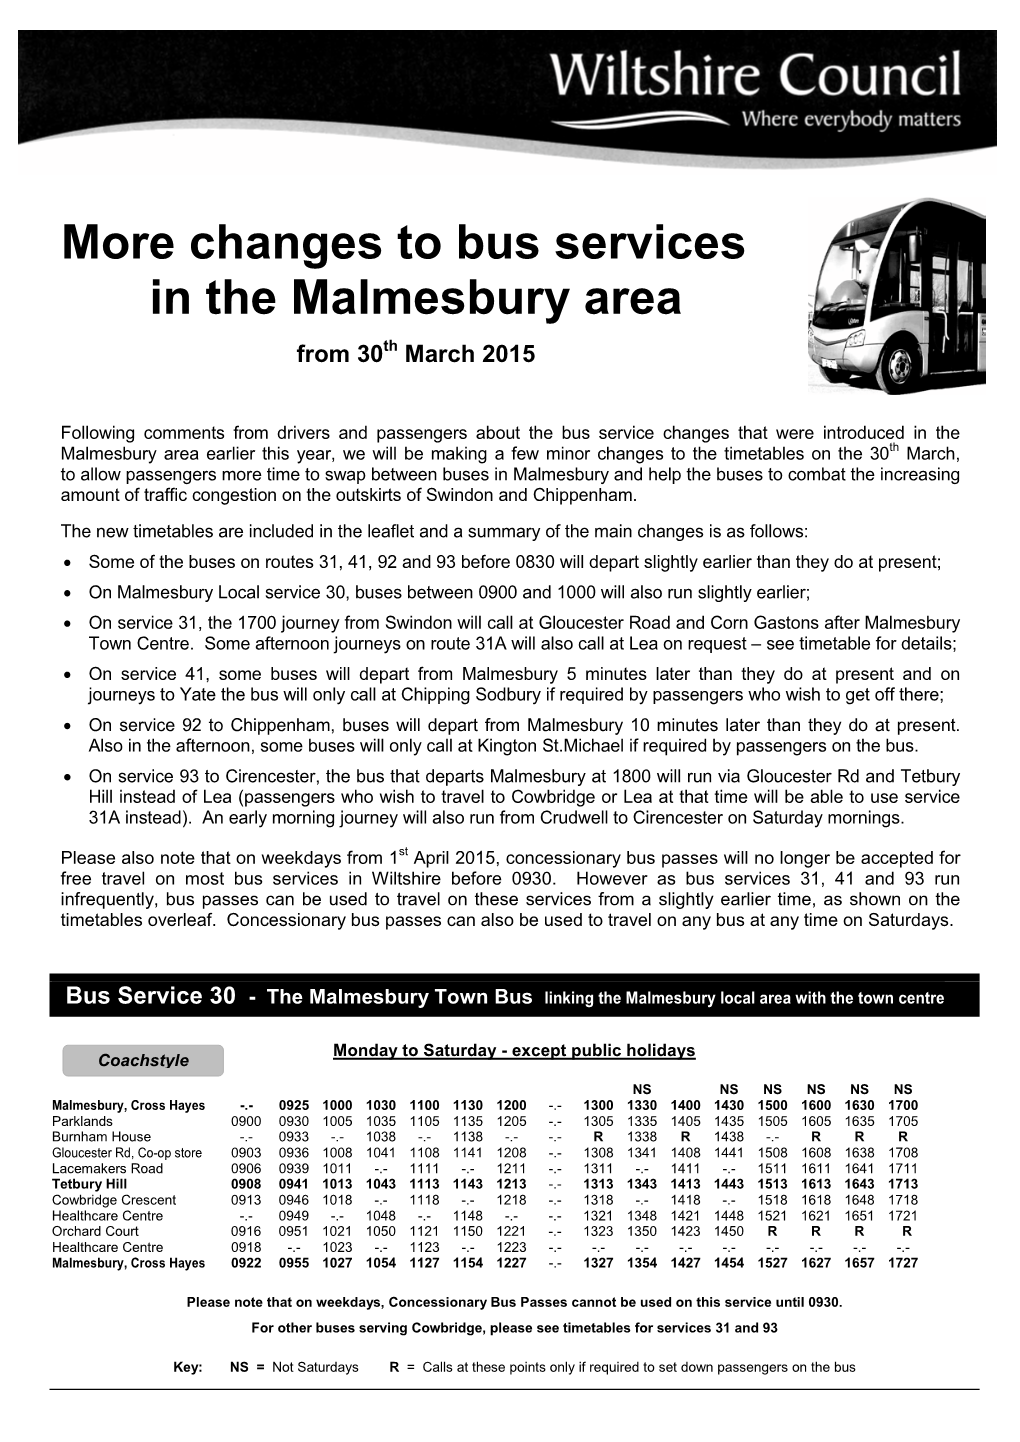 More Changes to Bus Services in the Malmesbury Area